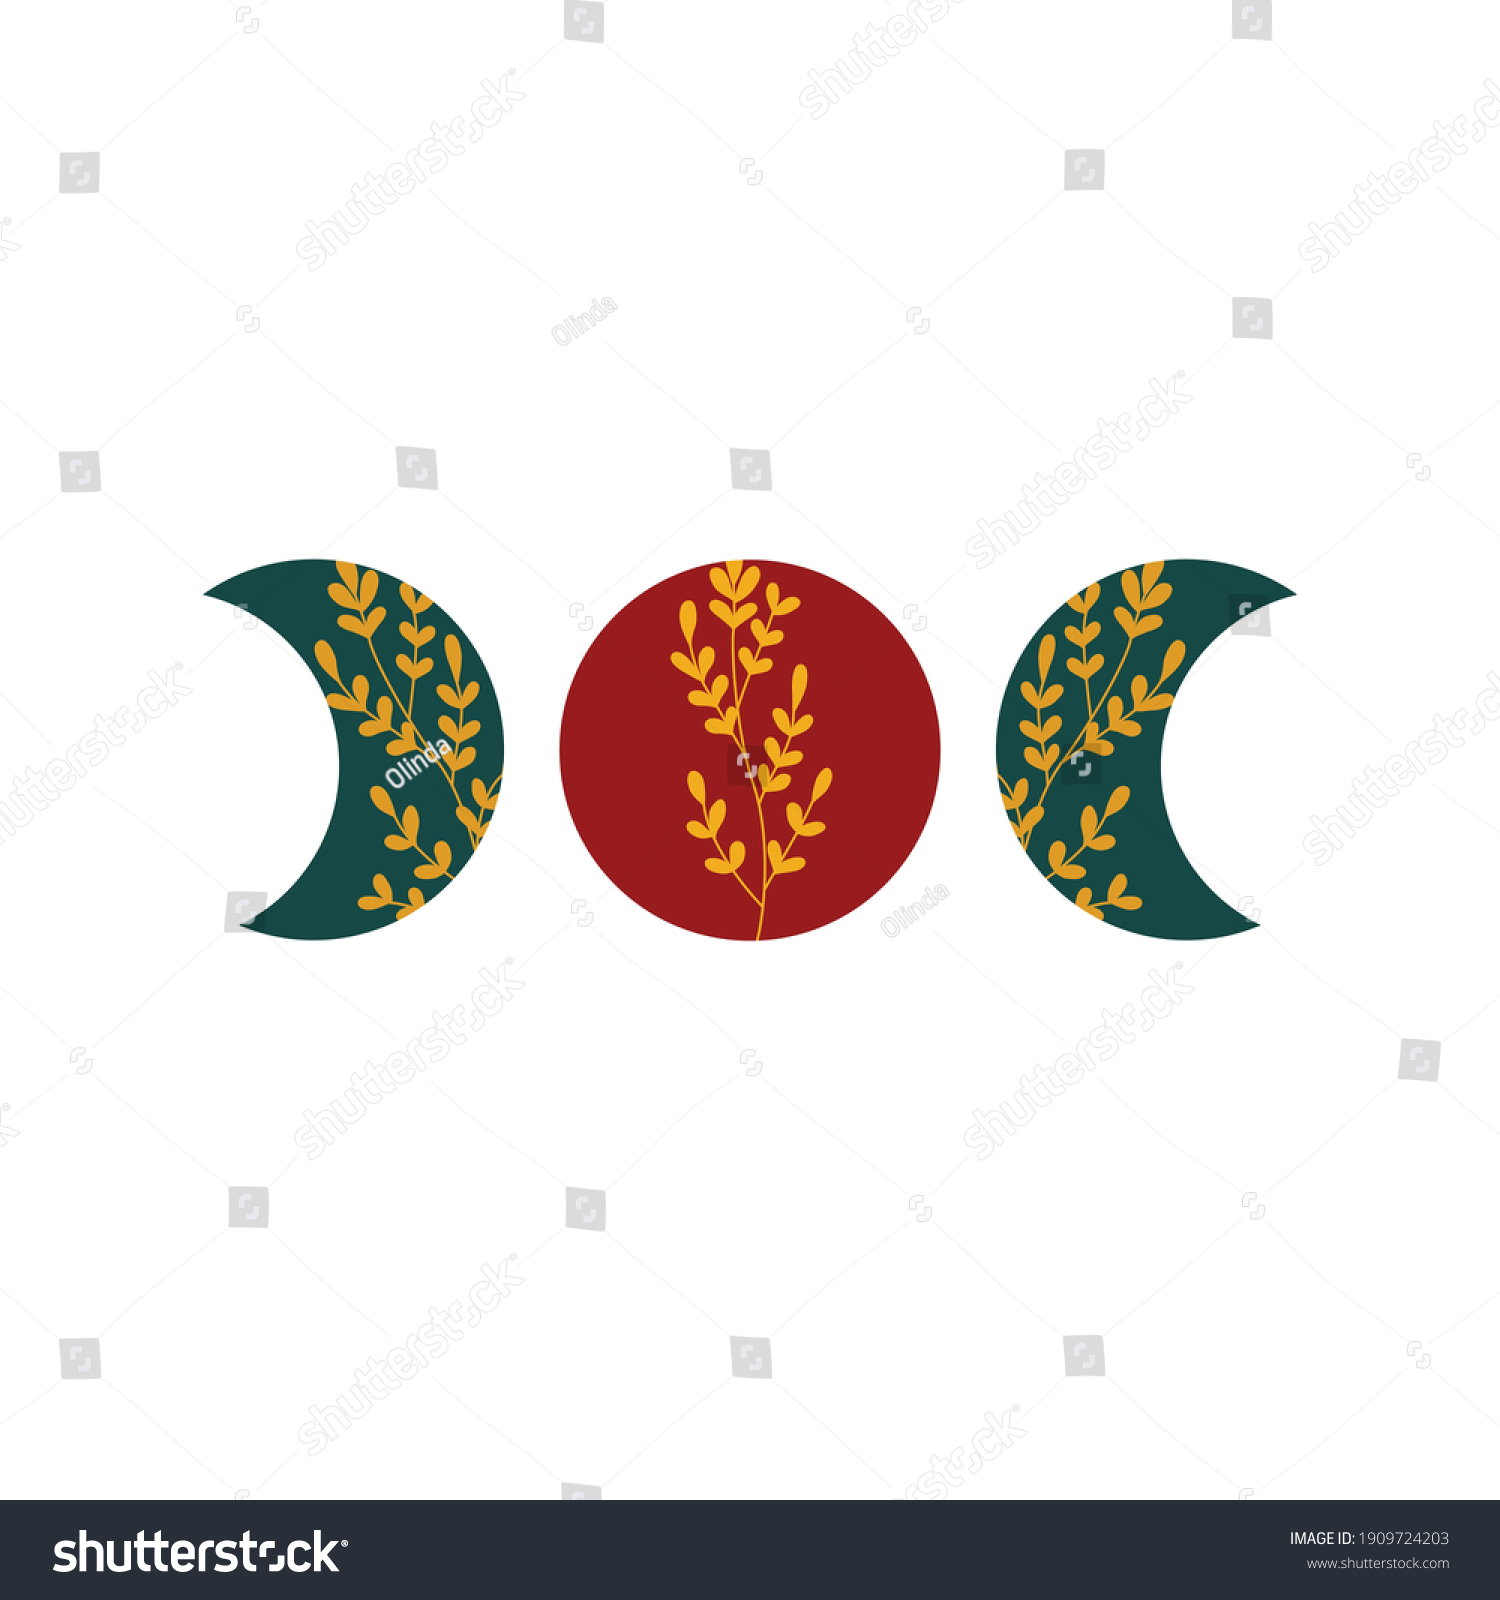 SVG of Royal green crescent red moon phases with golden lace floral ornament. Design element for logos icons. Vector illustration. Modern Boho style doodle art svg